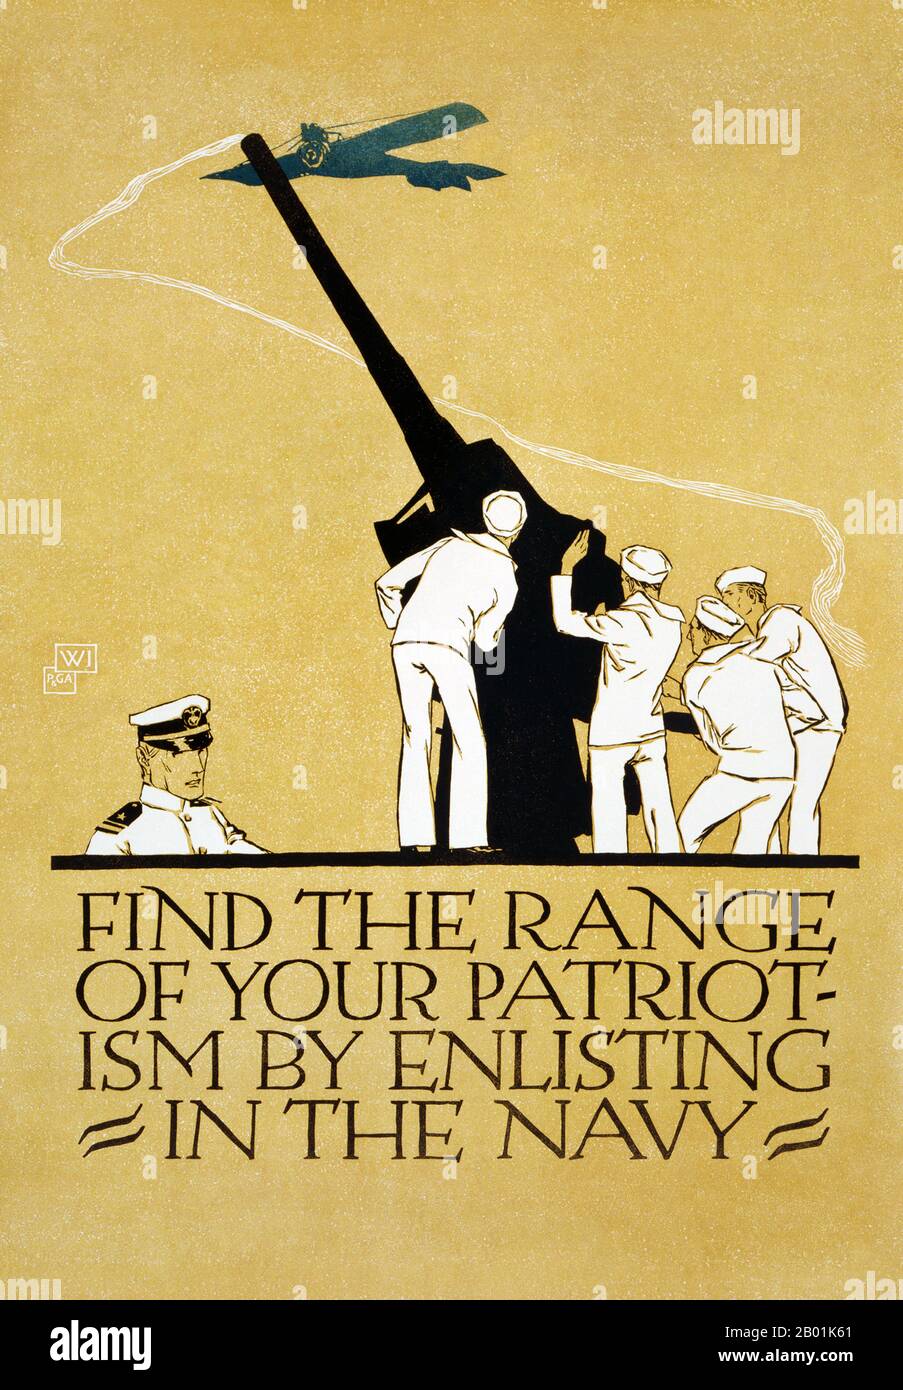 USA: 'Find the Range of your Patriotism by Enlisting in the Navy'. First World War naval recruitment lithograph poster by Vojtech Preissig (31 July 1873 - 11 June 1944), US Navy, 1918.  Prior to the outbreak of World War I, military recruitment in the US was conducted primarily by individual states. Upon entering the war, however, the federal government took on an increased role, using five basic appeals to motivate these campaigns: patriotism (the most prevalent theme), job/career/education, adventure/challenge, social status and travel. Stock Photo